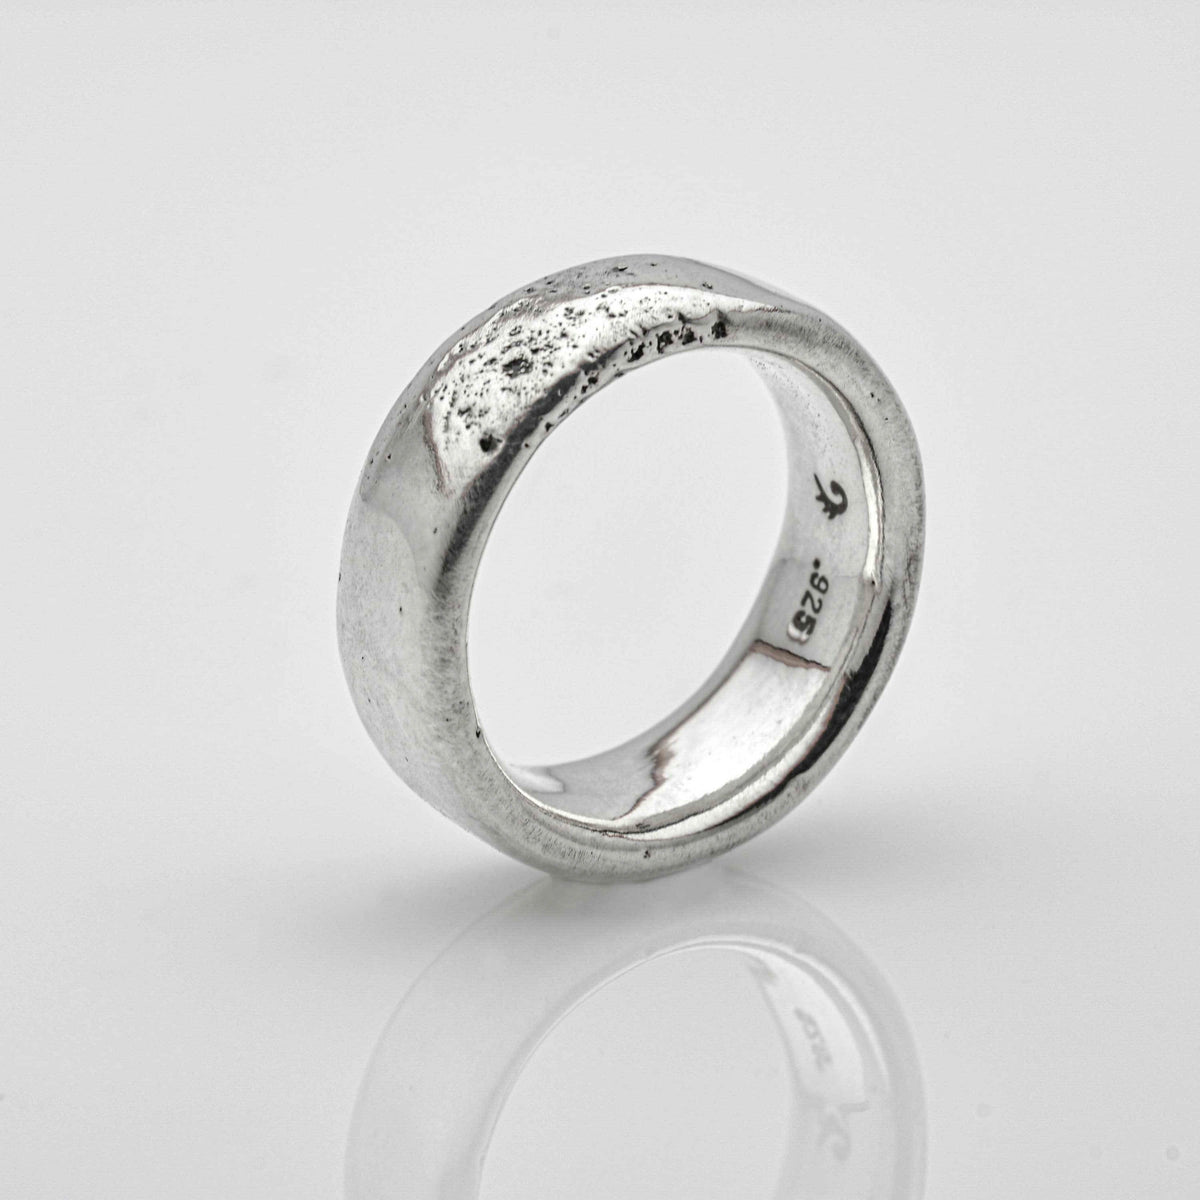 Solid and fat sterling silver Old Moon Ring